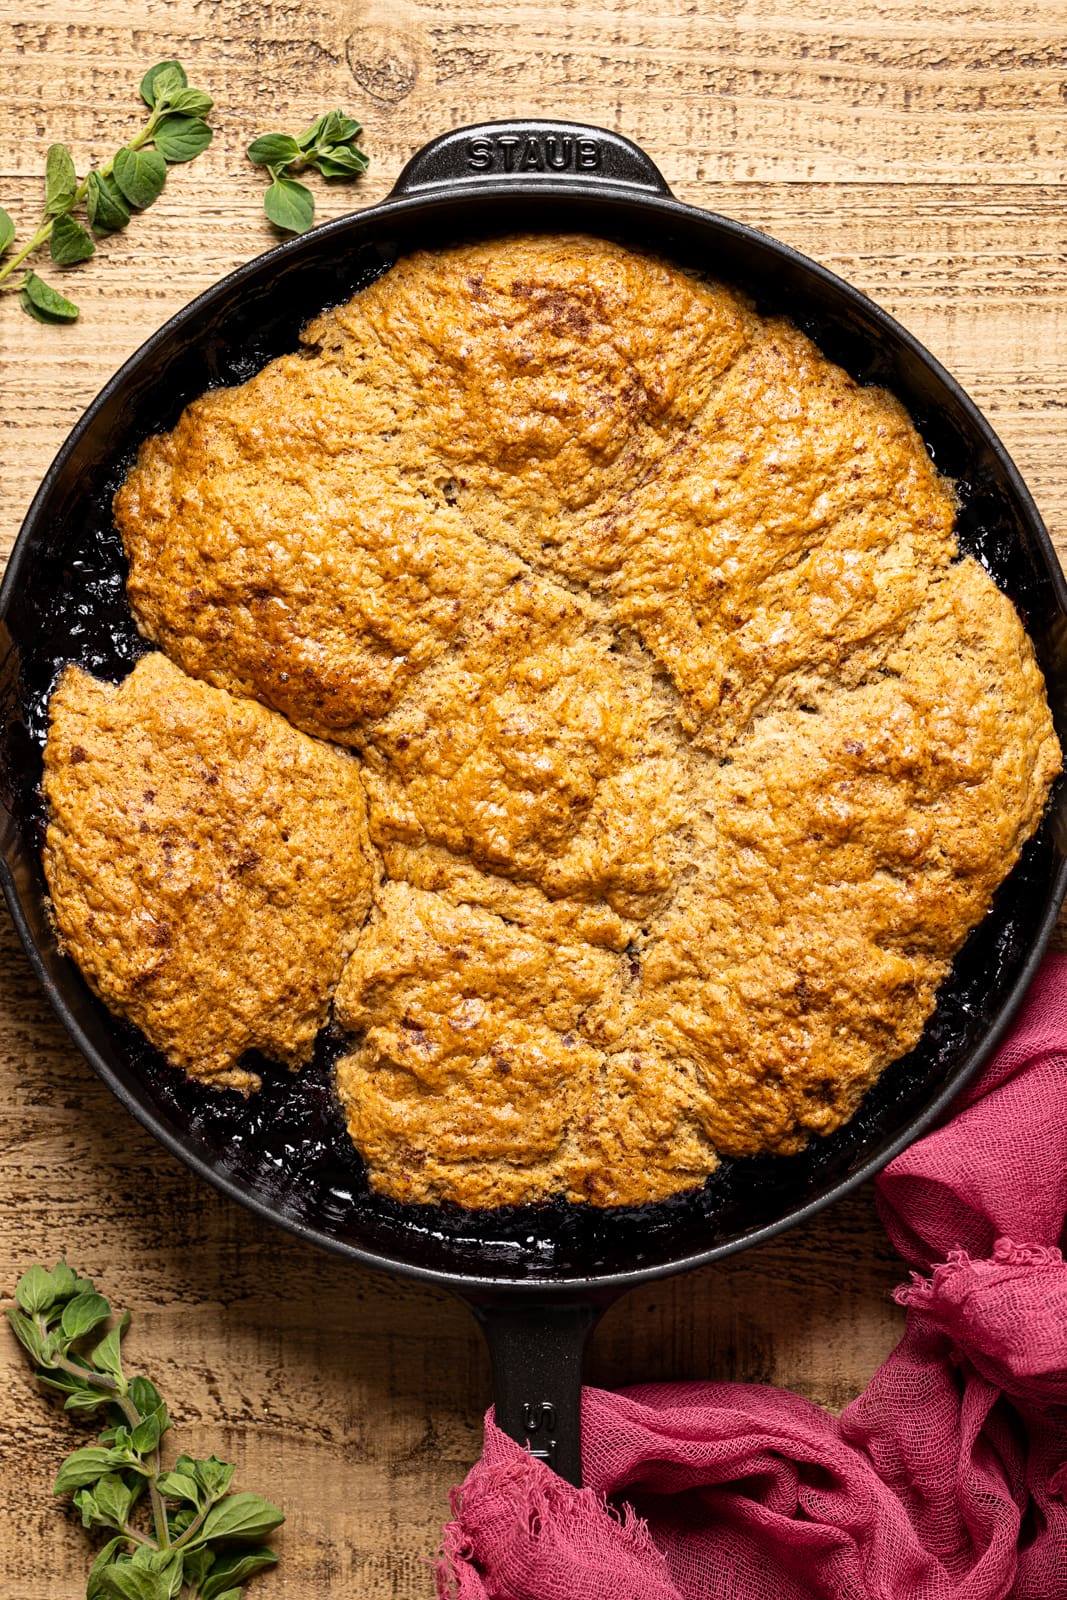 Baked cobbler in a black skillet on a brown wood table.